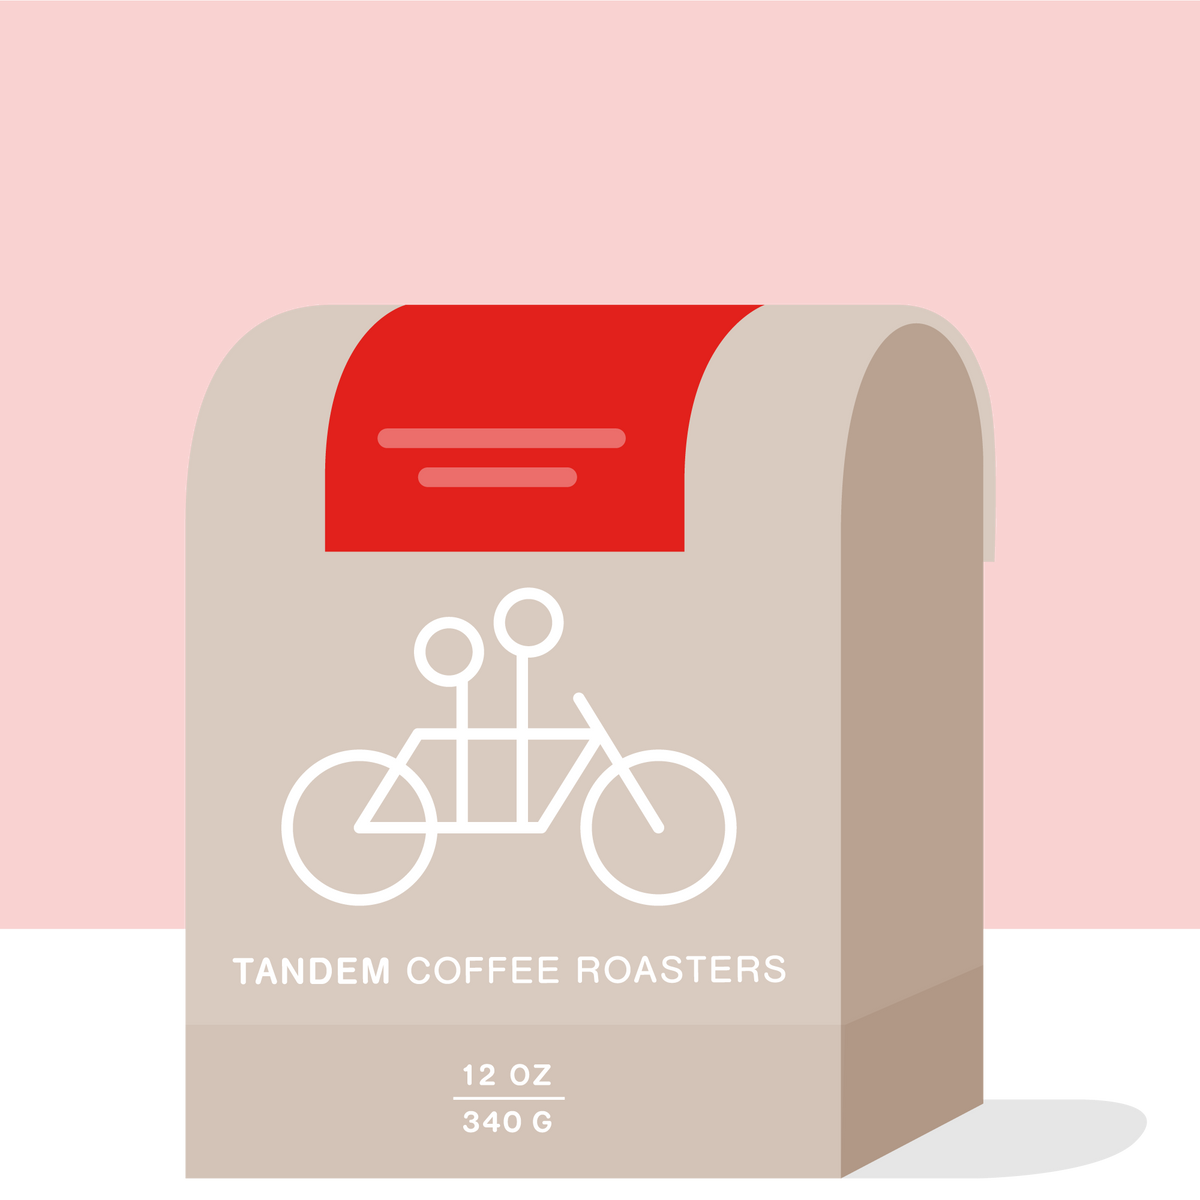 A minimalist design of a gray Time & Temperature coffee bag from Tandem featuring a white tandem bicycle logo, placed against a bold red background. This espresso blend bag indicates a capacity of 12 oz (340g).